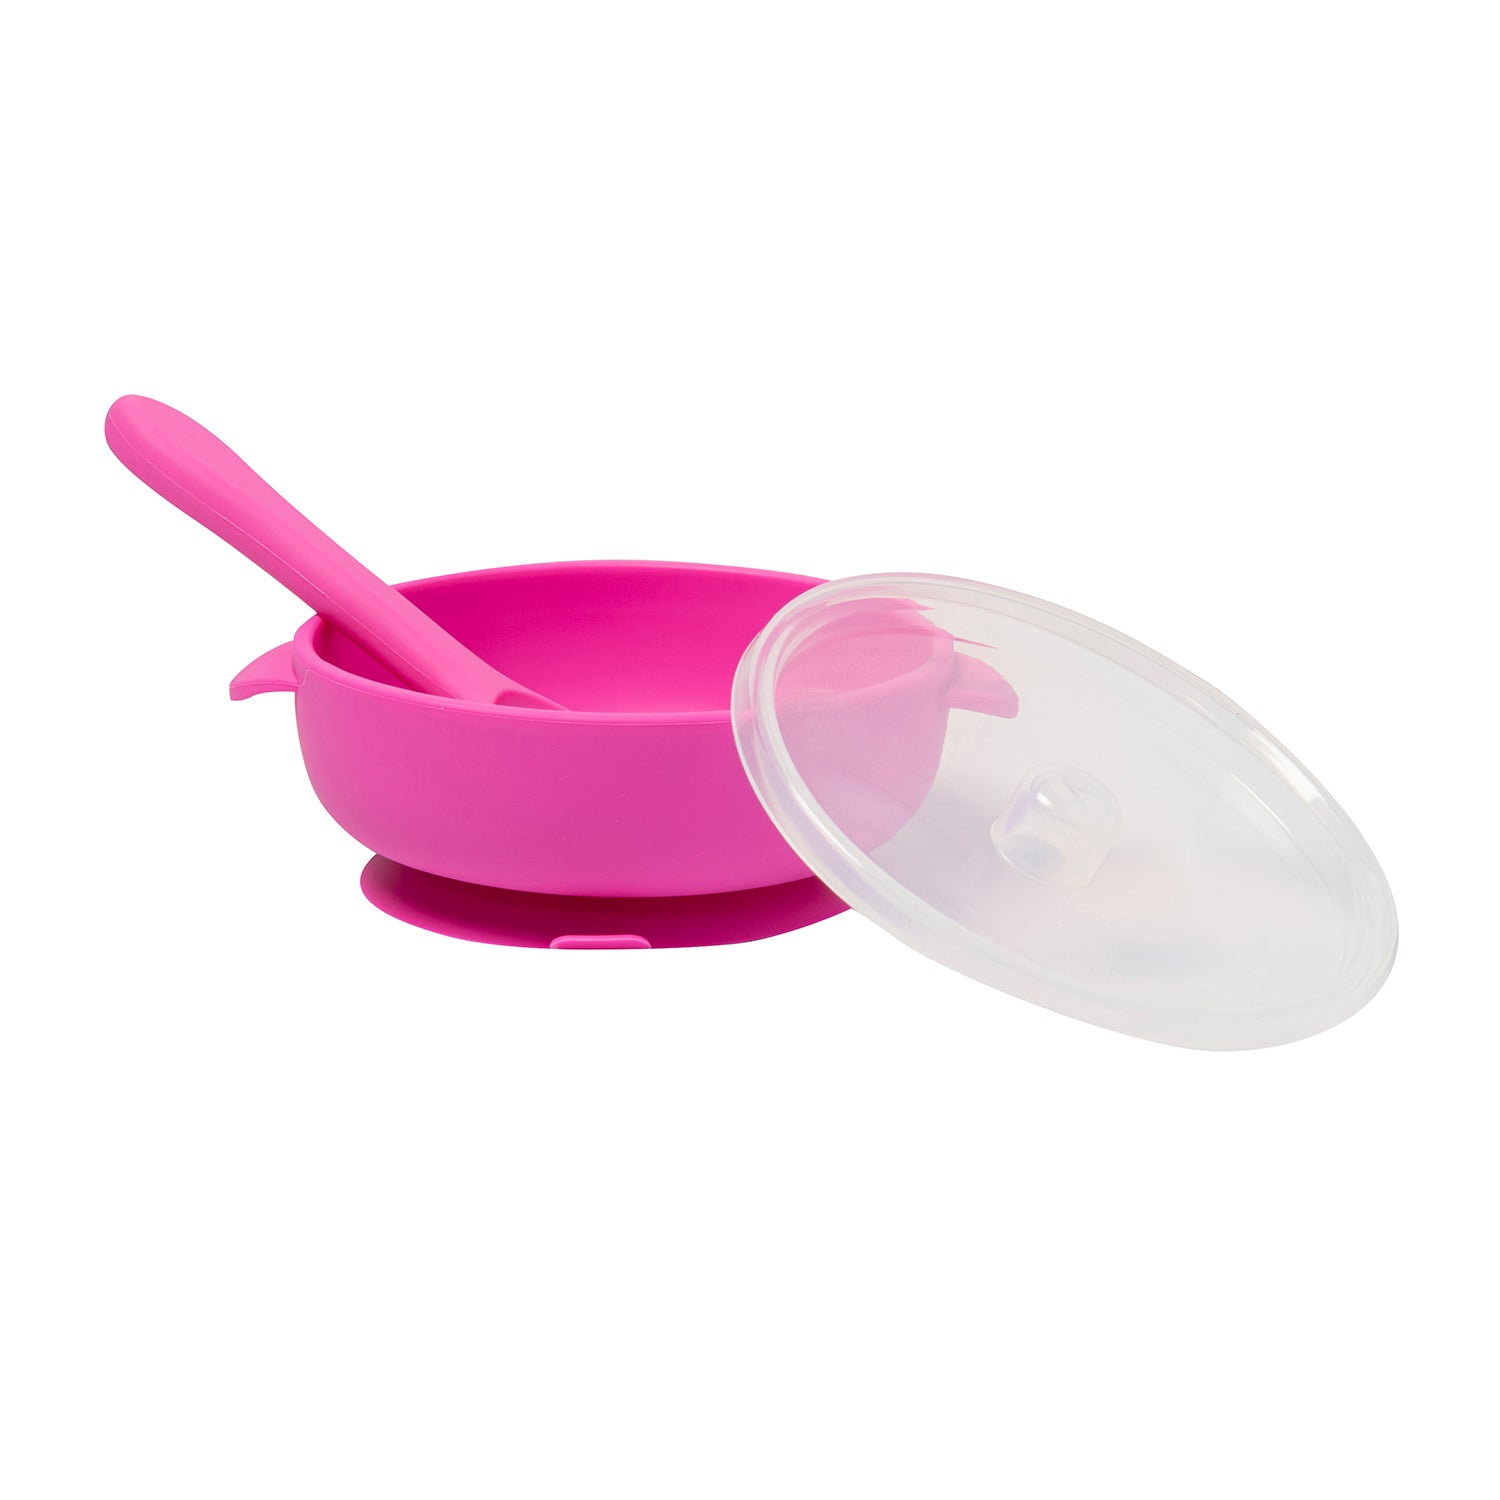 Magenta Silicon Bowl With Lid And Spoon Set